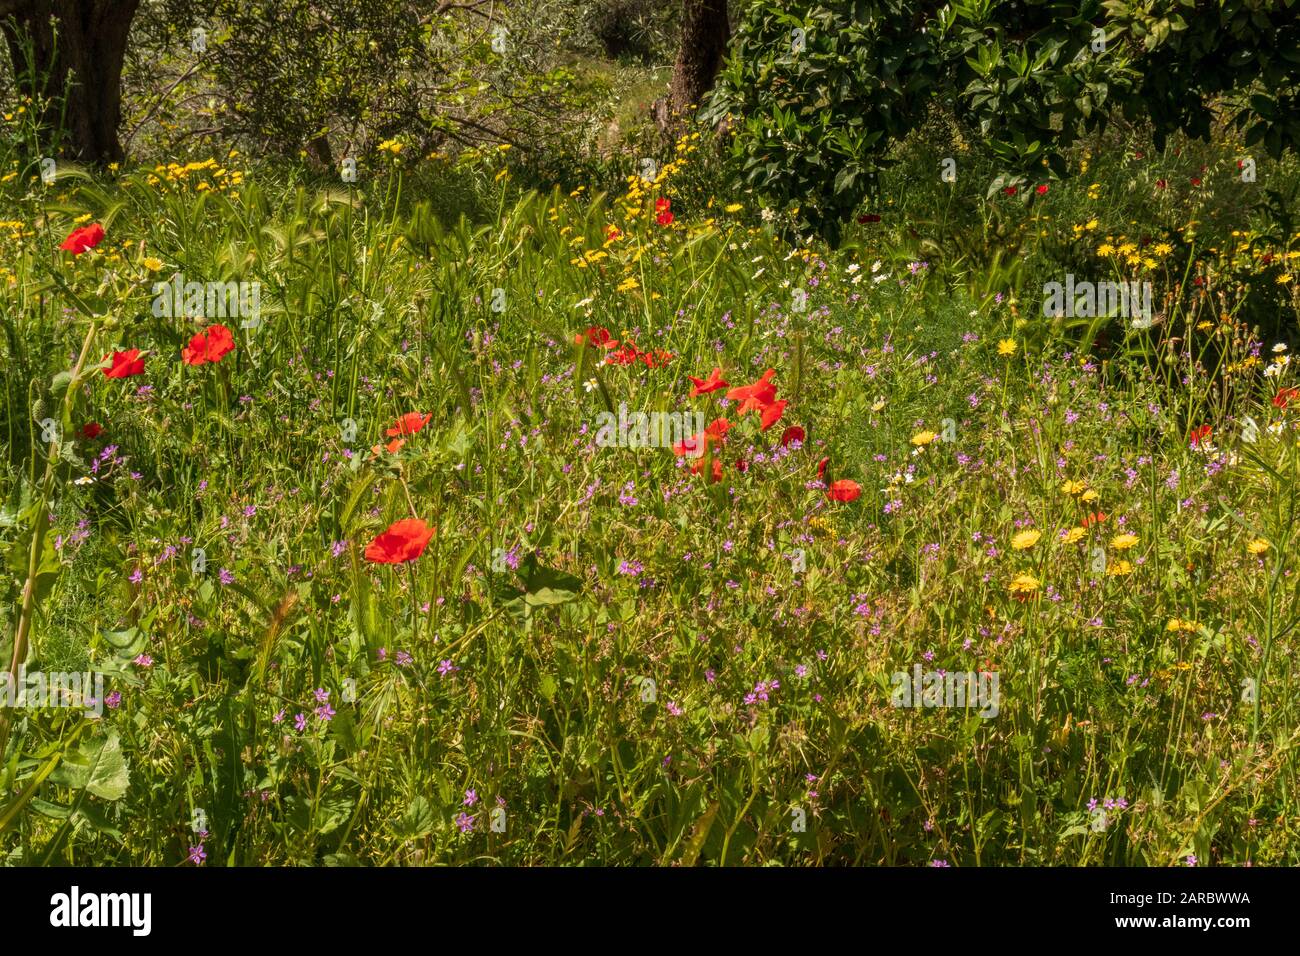 Wild Flowers in a Meadow in the Spanish countryside Stock Photo